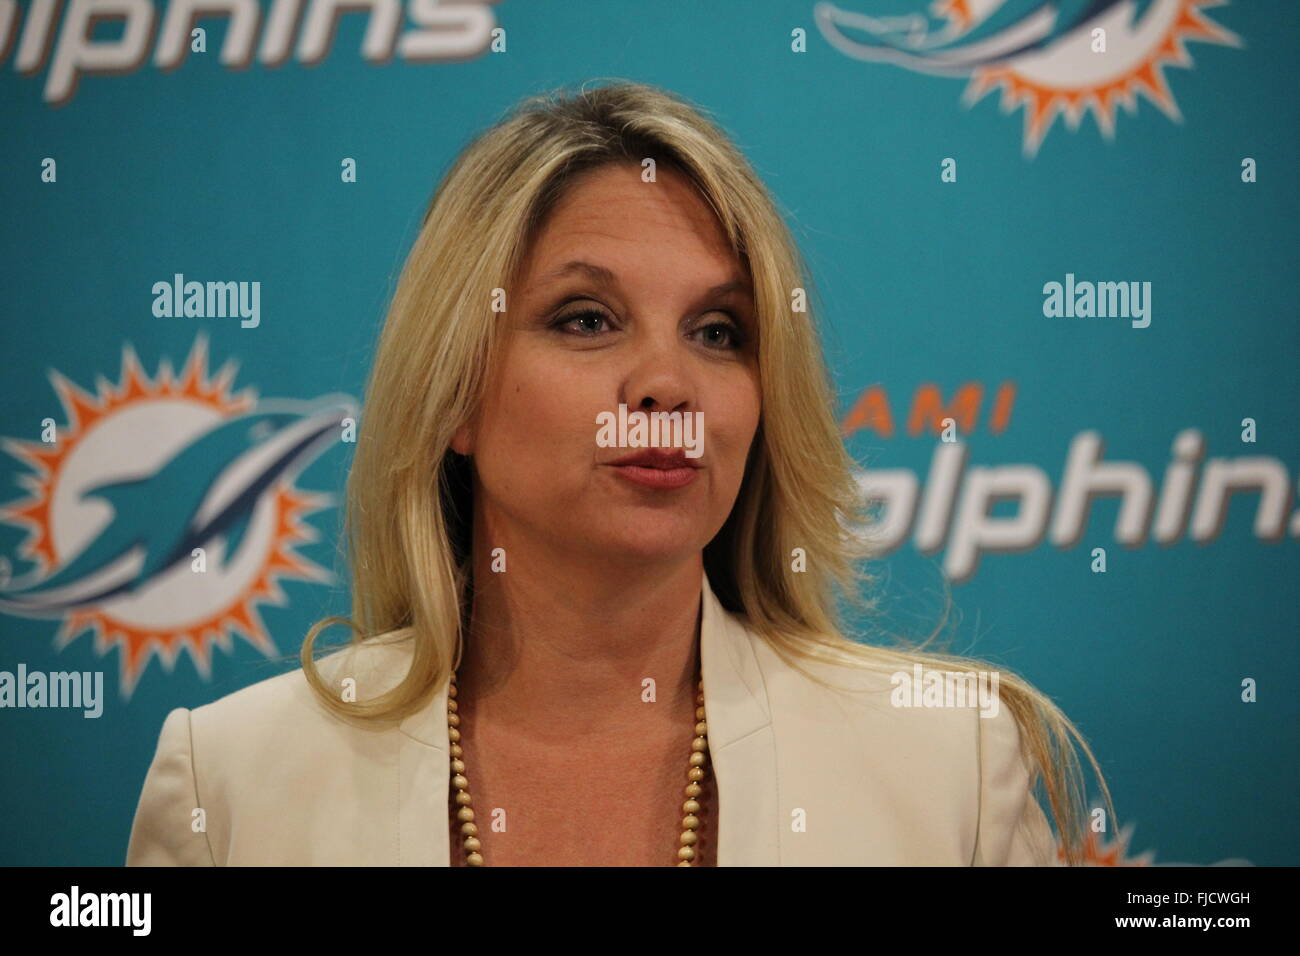 Rio de Janeiro, Brazil, 1 March 2016: The Miami Dolphins NFL team is seeking cheerleaders in Rio de Janeiro. On the afternoon of Tuesday the entertainment Director Dorie Grogan attended a press conference to talk about the opportunity to become a cheerleader of a great football team. Also participated in the press conference the cheerleaders Kristan and Allison. Credit:  Luiz Souza/Alamy Live News Stock Photo